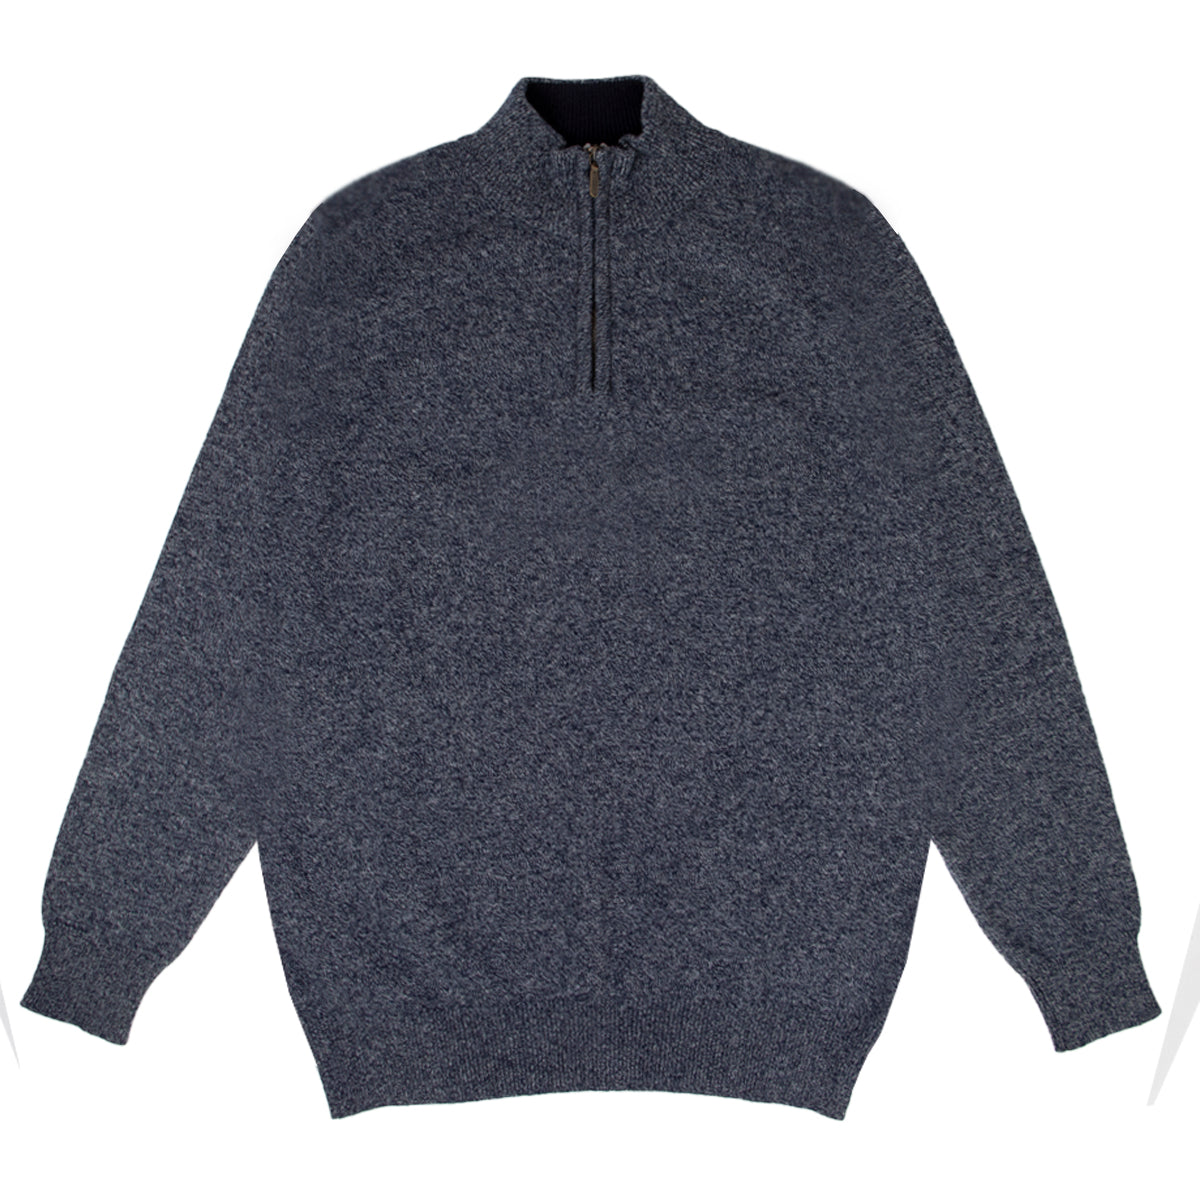 The Bowmore 1/4 Zip Neck Cashmere Sweater - Flannel / Navy  Robert Old   